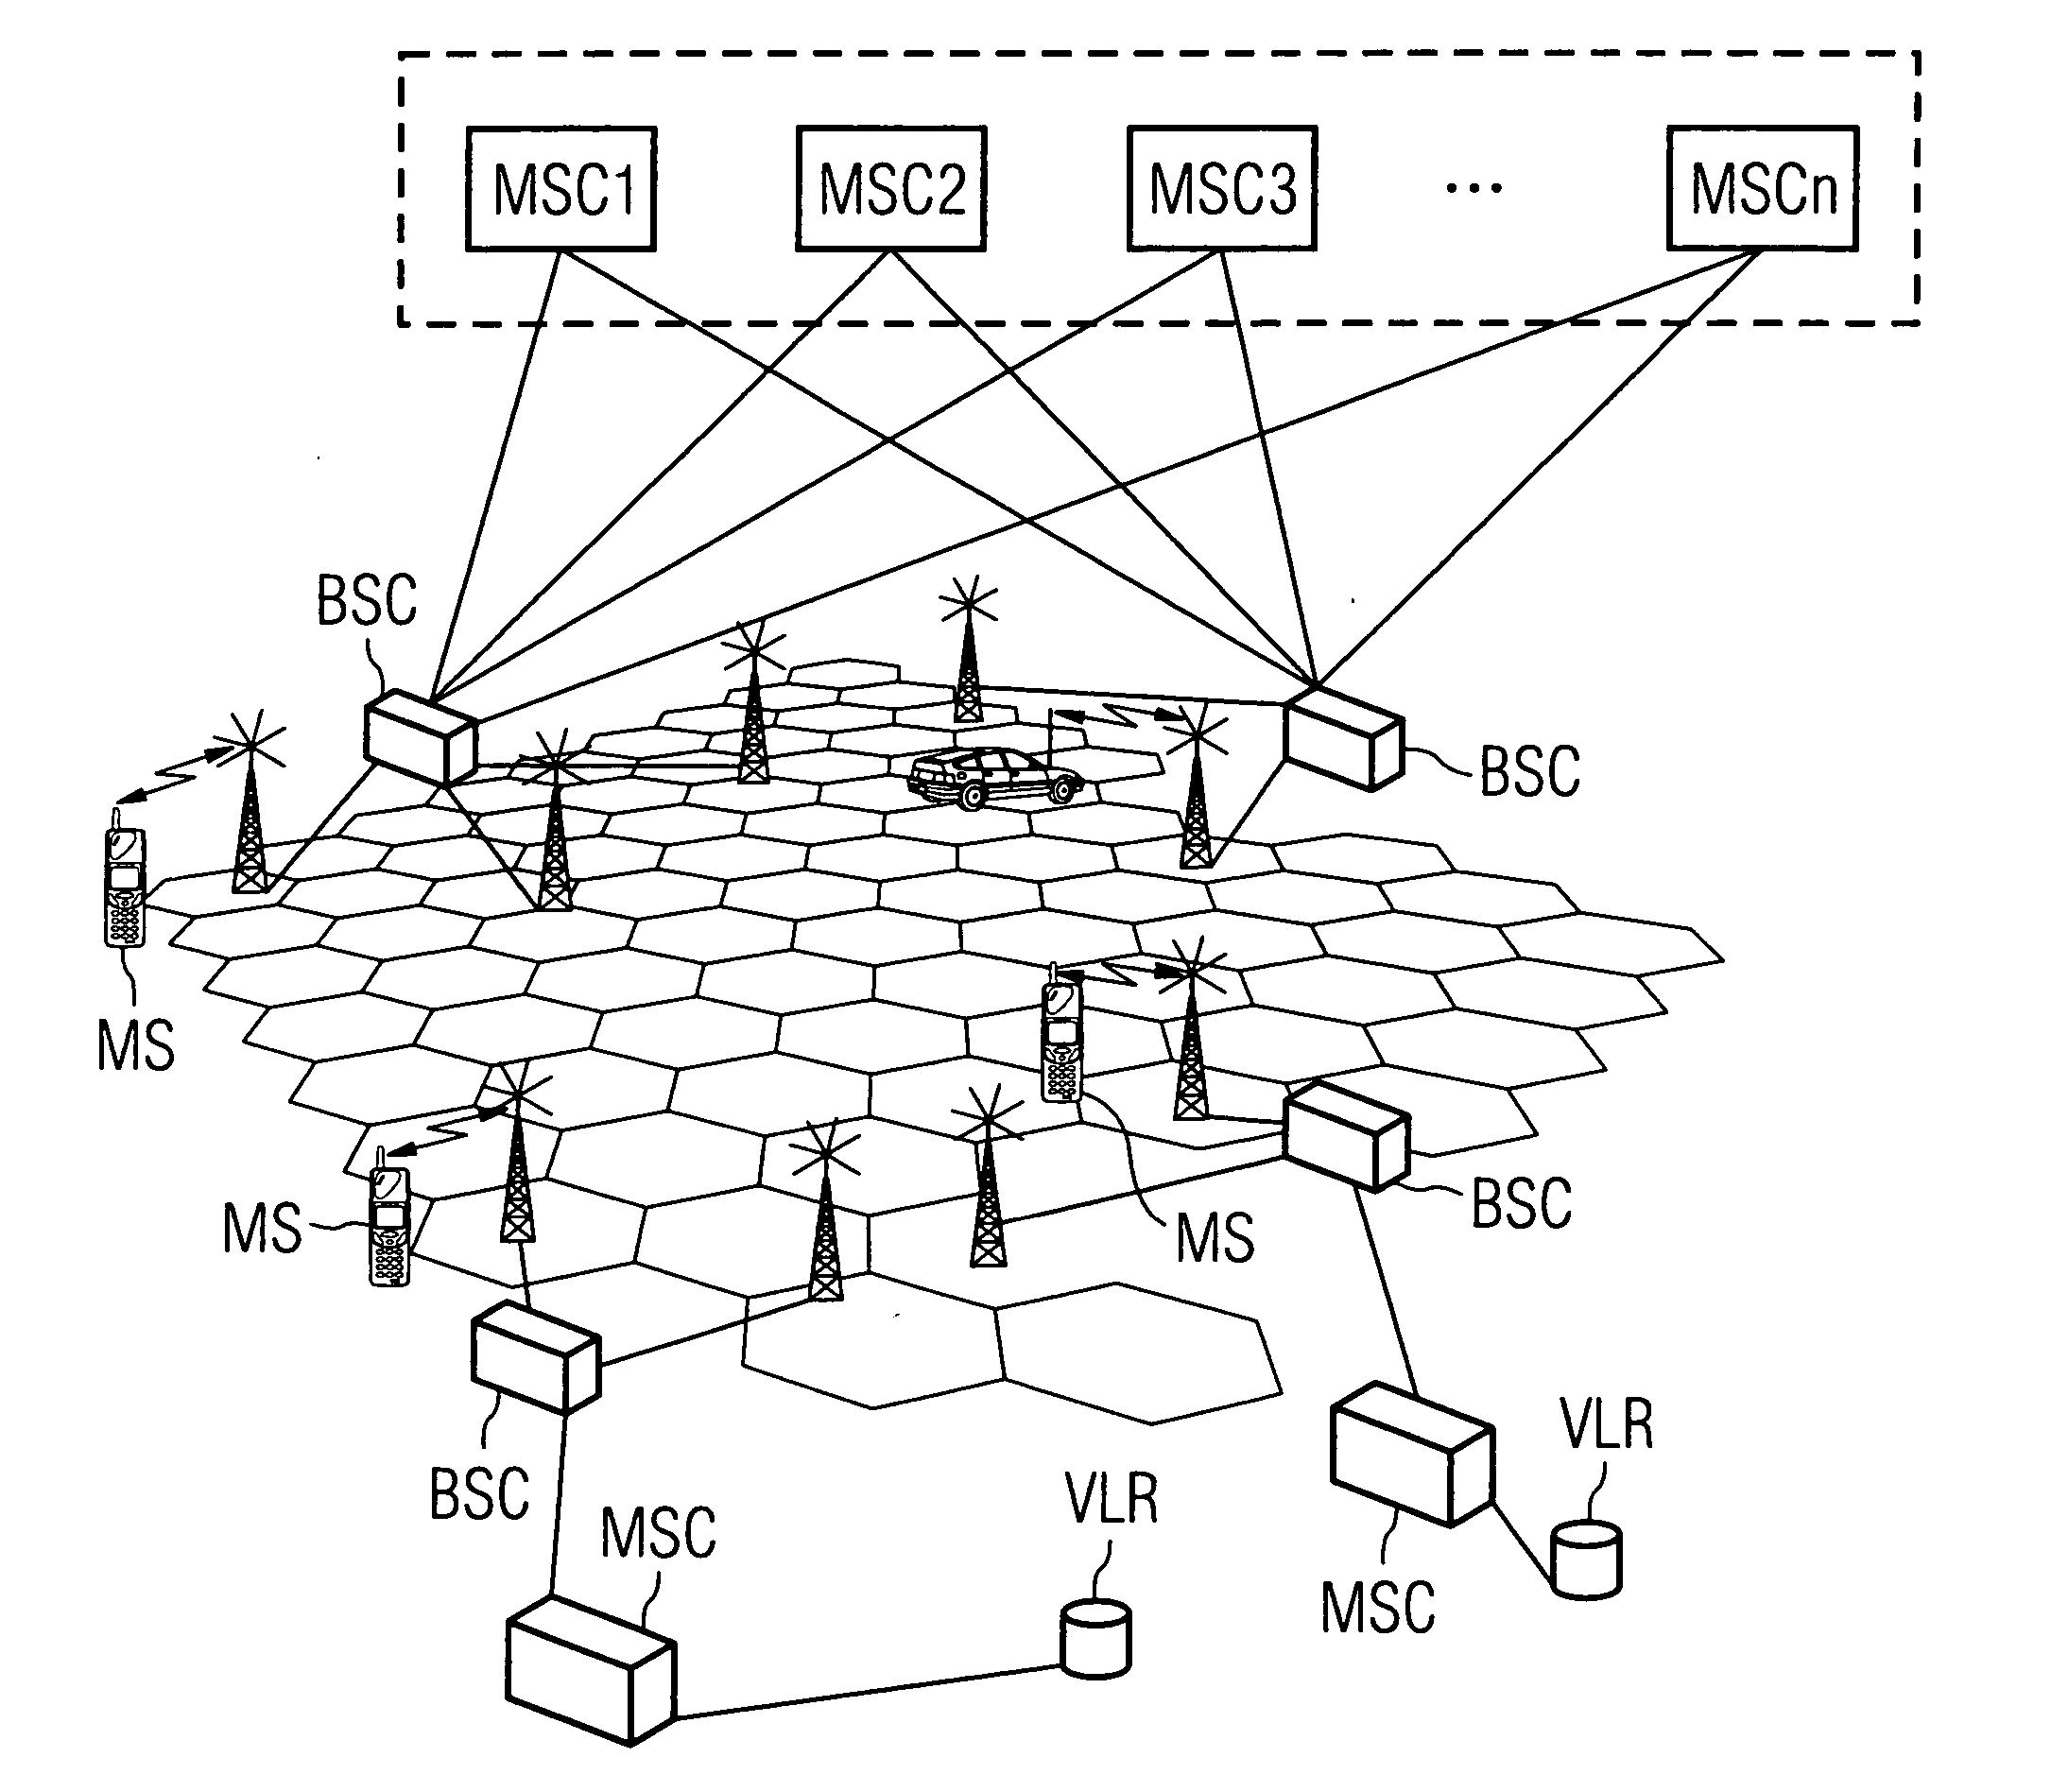 Signaling in a mobile cellular communication network with pooled MSCs